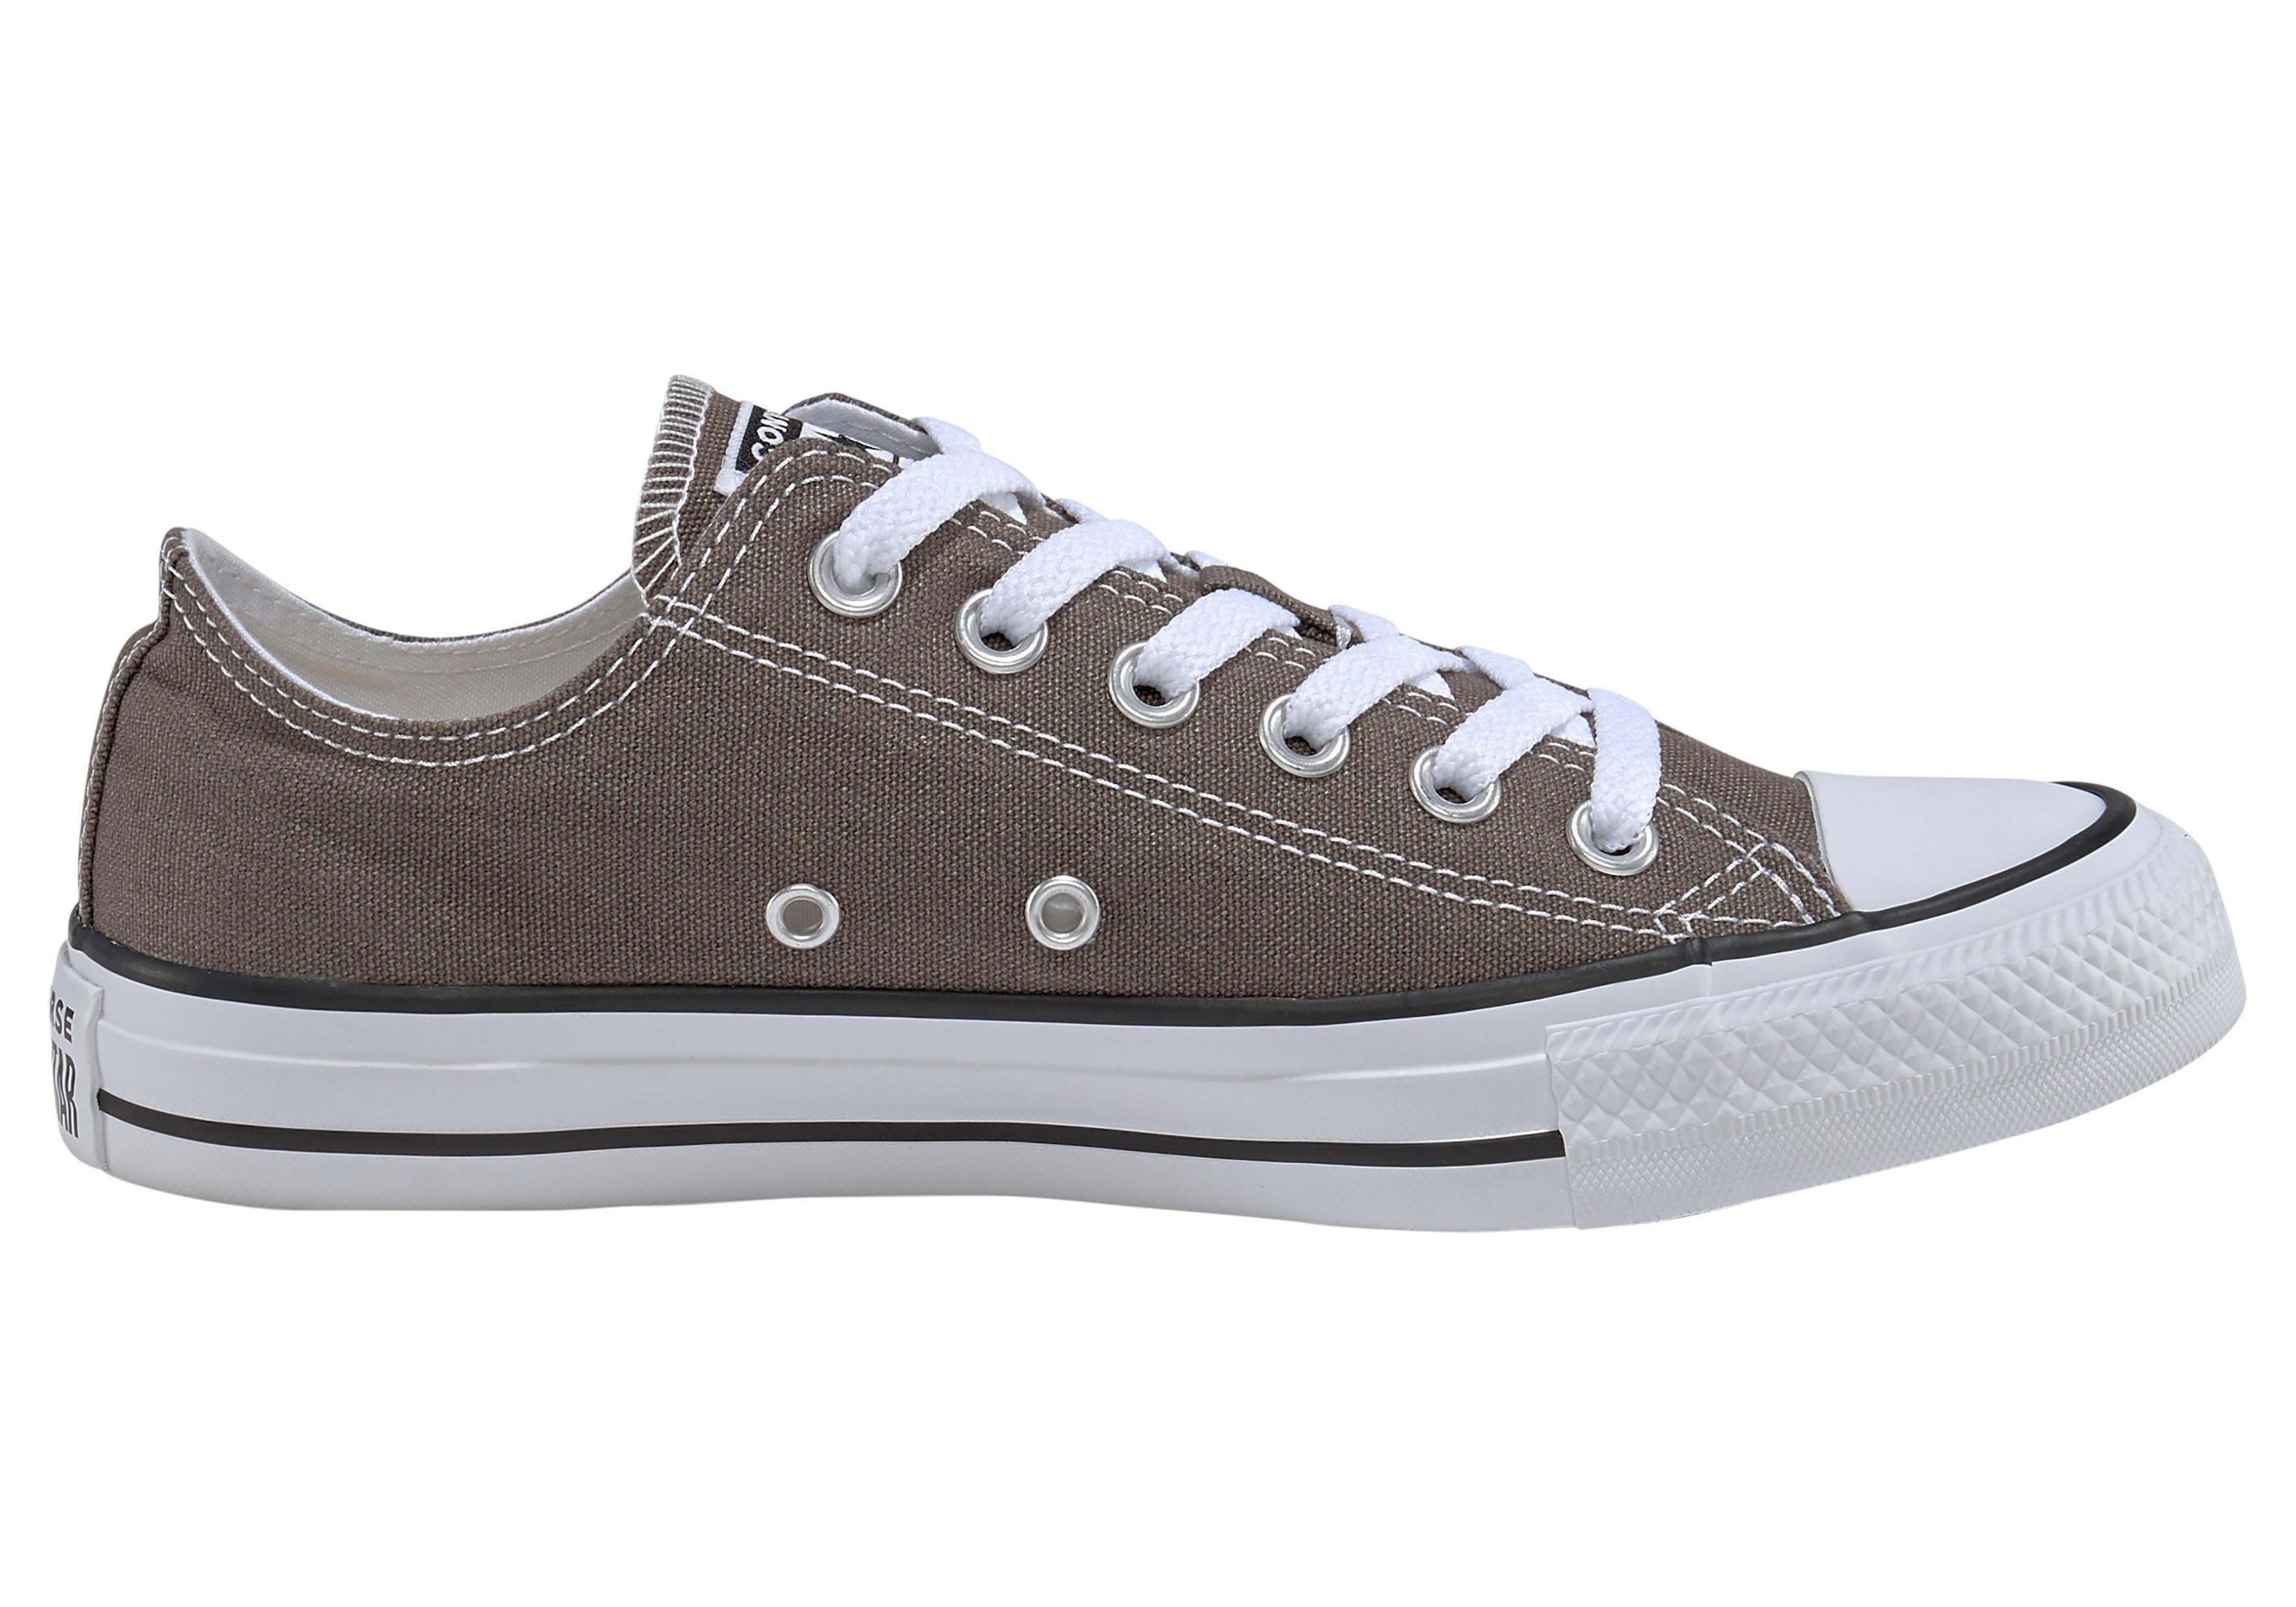 Ox Sneaker Taylor All Core Converse Chuck Charcoal Star